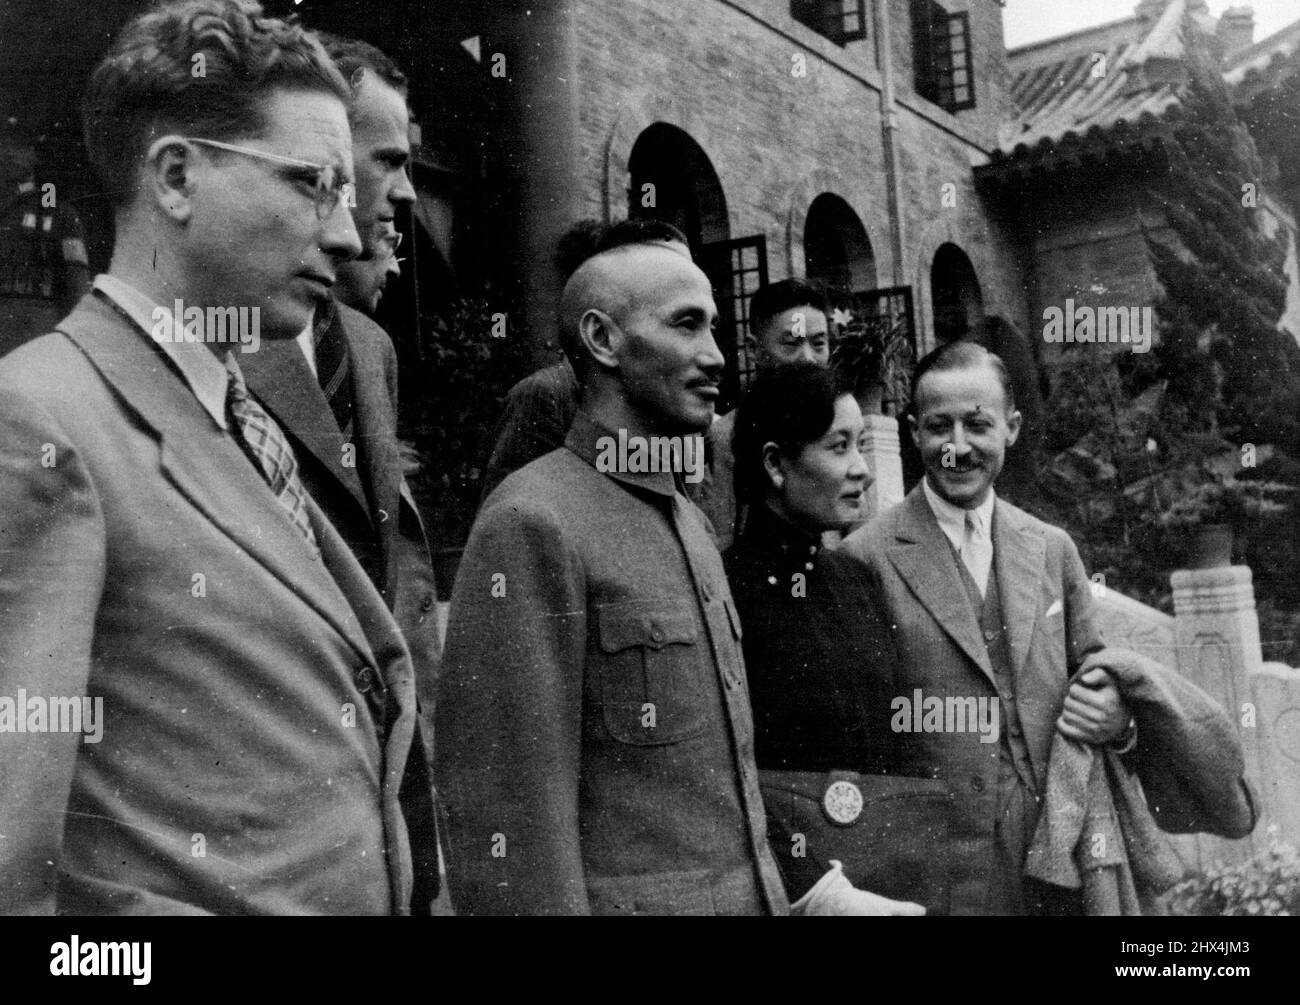 China's Generalissimo And His Indispensable Wife New Picture -- A picture just received of General Chiang Kai-Shek, China's Generalissimo, and Madame Chiang Kai-Shek, his American-educated wife, as they received foreign correspondents at Nanking, seat of the Chinese Government, from where, together, they are controlling China's fortunes in the critical days of the war with Japan. Madame Chiang is her husband's 'right-hand woman', acting as his adviser, interpreter and Chief of propaganda. October 18, 1937. (Photo by Planet News Ltd). Stock Photo